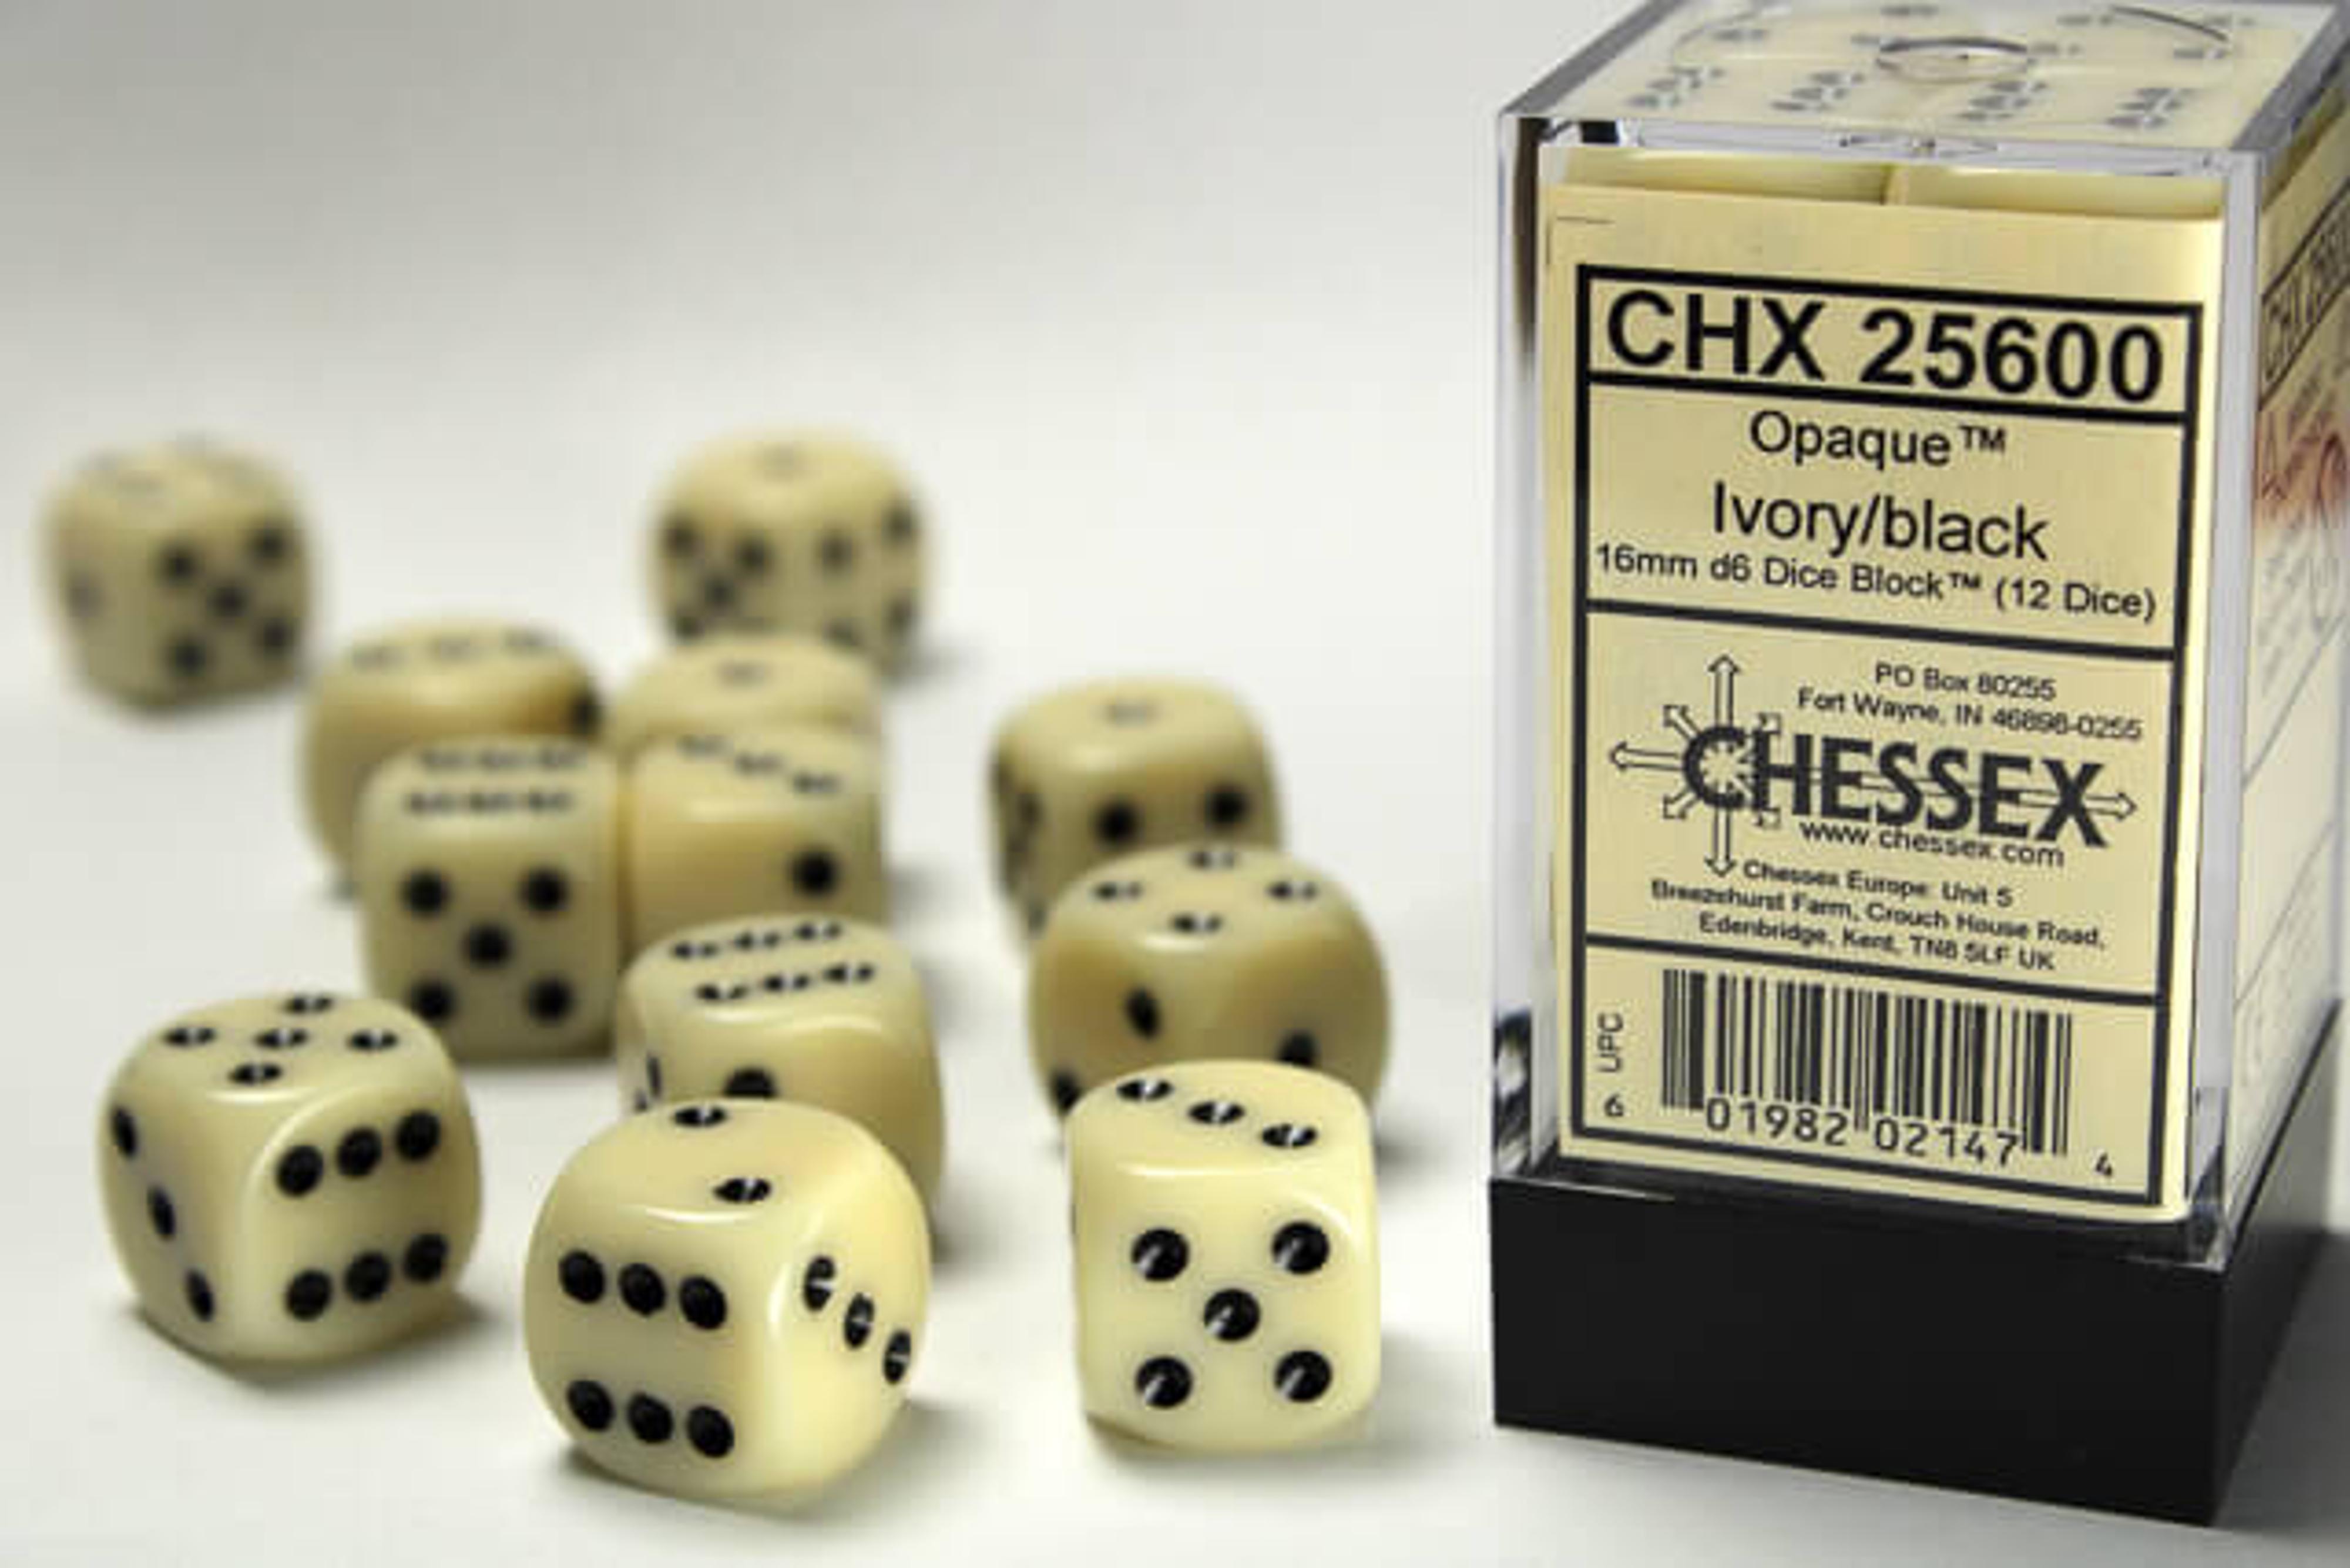 Chessex Opaque 16mm Opaque Ivory/Black D6 Dice Block (12 pc)